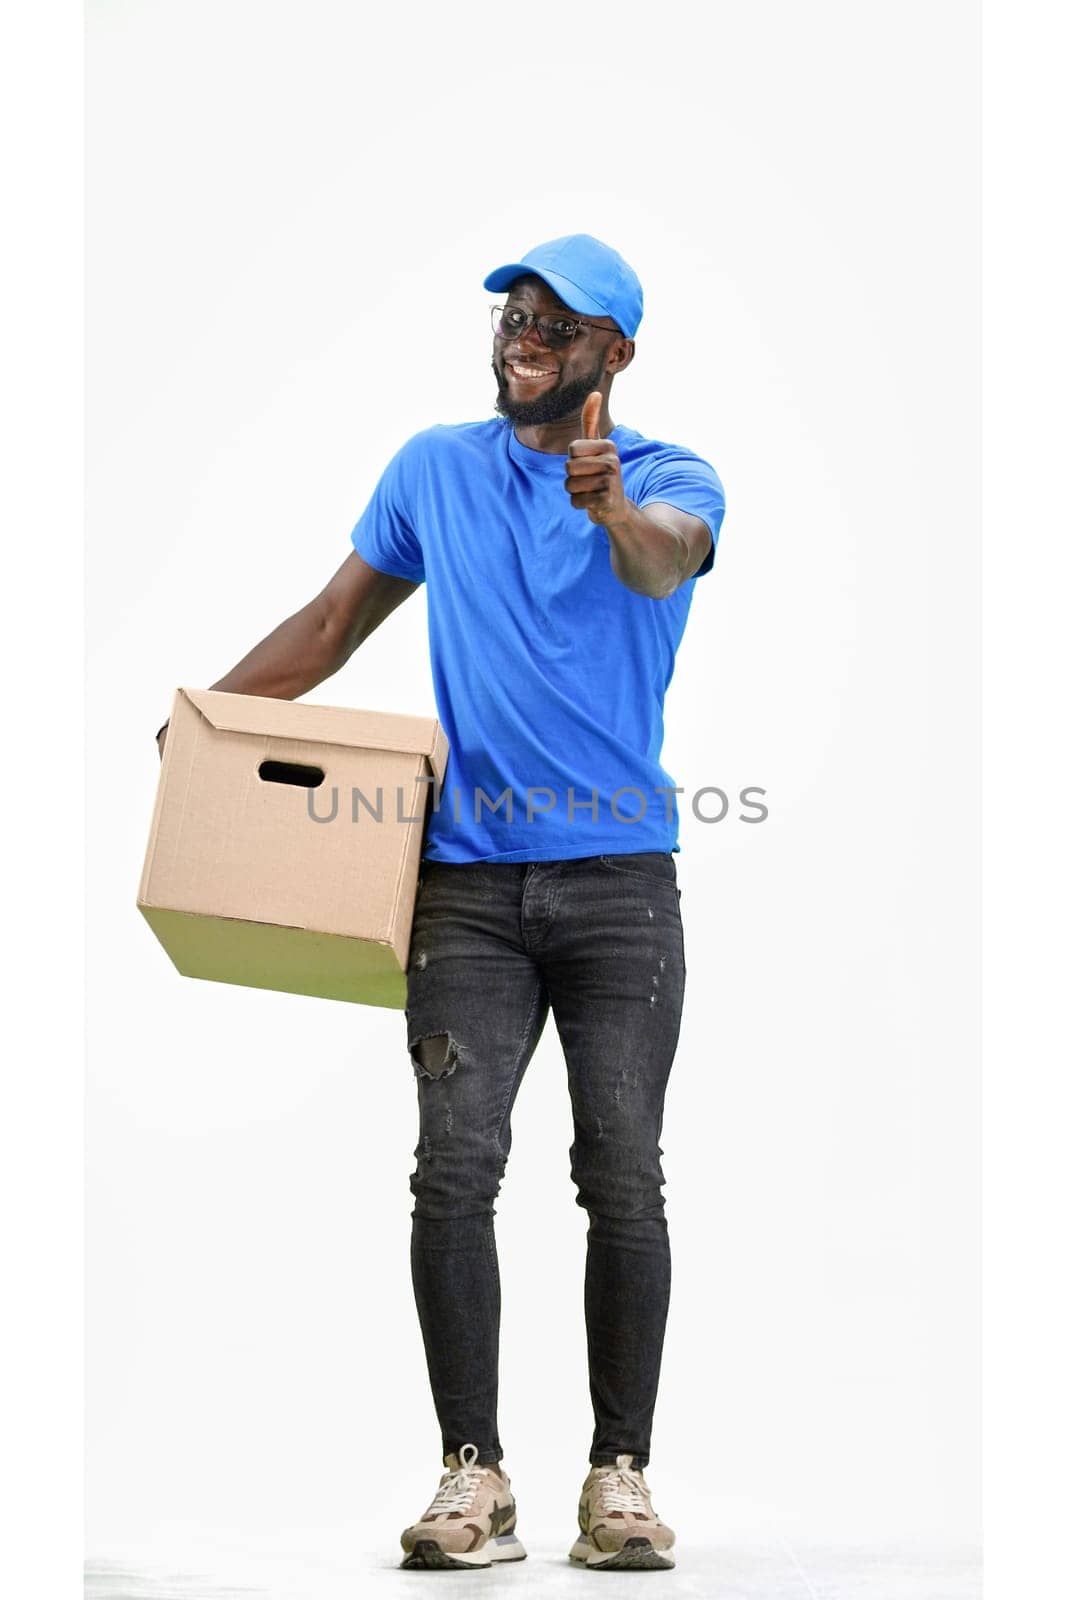 The deliveryman, in full height, on a white background, shows a thumbs up by Prosto